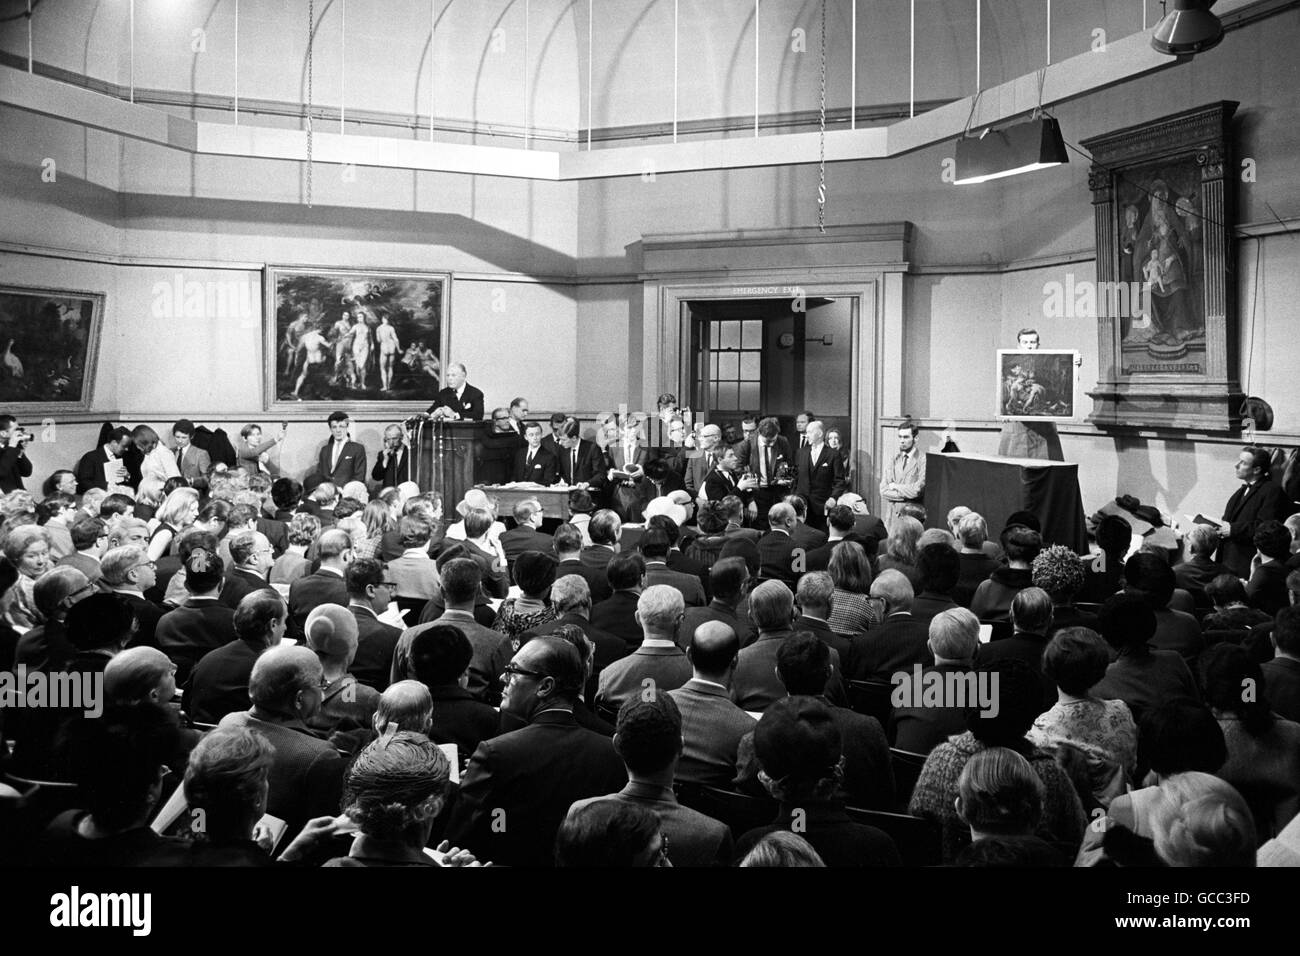 The scene during the auction of Sir Peter Paul Rubens paintings at Christie's in London. Bids are being made for a modello painting, 'Samson and Delilah', which was sold for 24,000 guineas to the Hallsborough gallery in London. On the wall behind auctioneer Ivan Chance is 'The Judgment of Paris' a Rubens painting, owned by Edna Savage, bought in 1933 in a job lot of pictures. It failed to meet its reserve price and was bought in at 24,000 guineas. Stock Photo